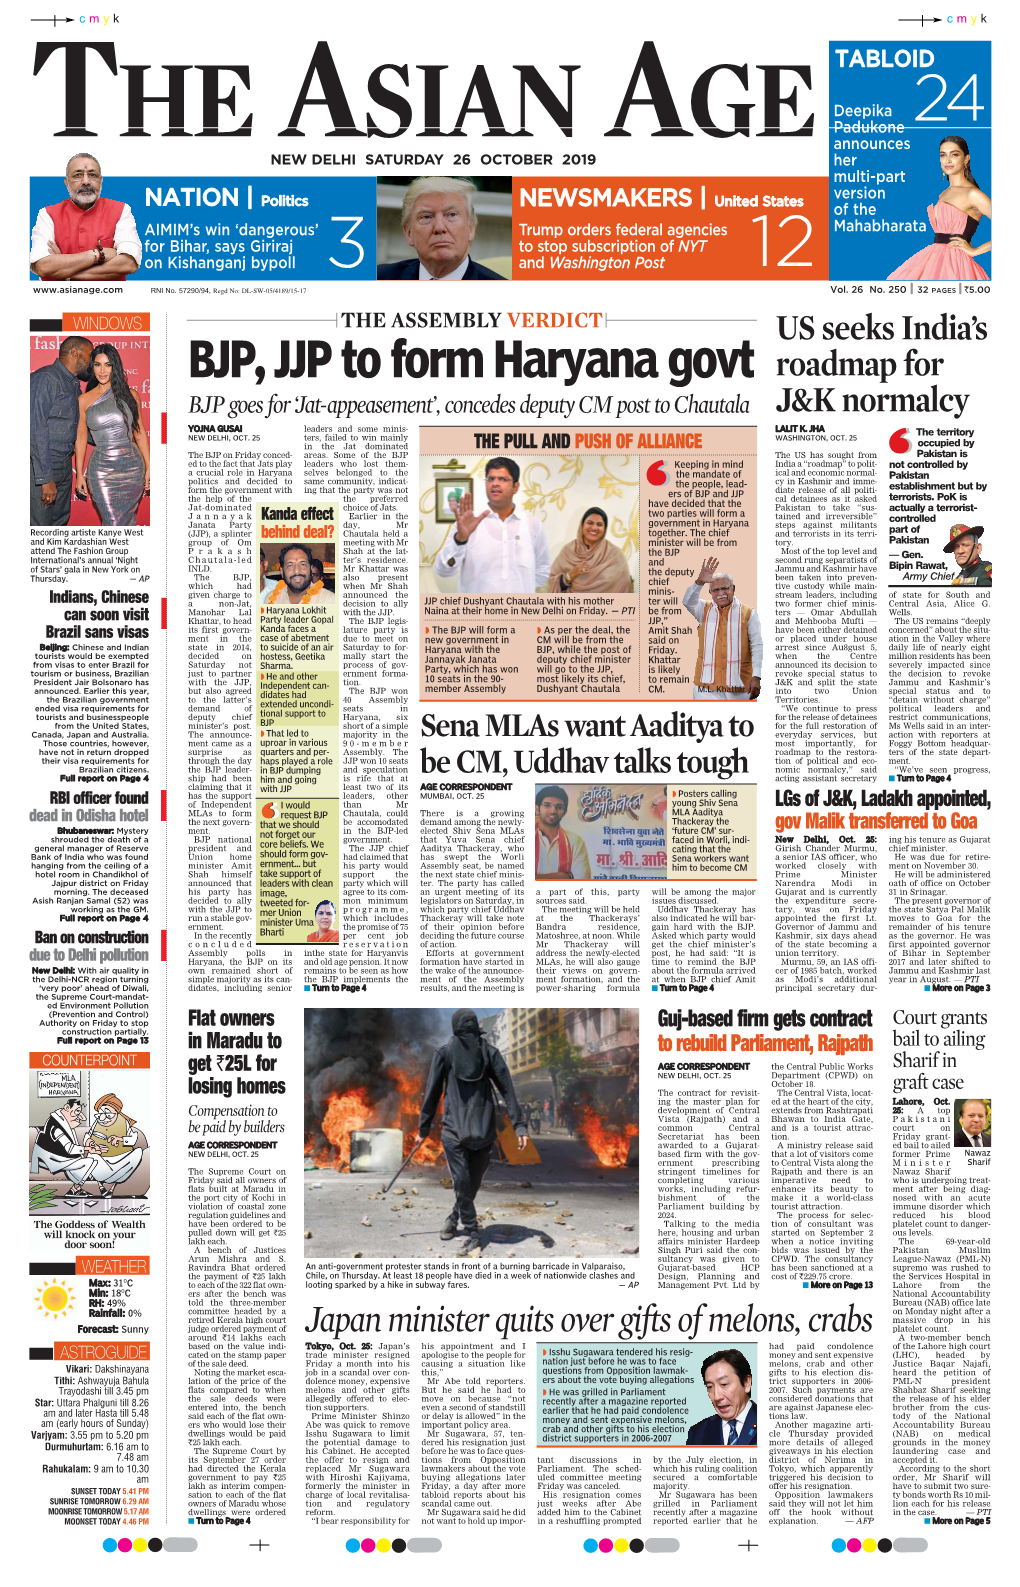 BJP, JJP to Form Haryana Govt Roadmap for BJP Goes for ‘Jat-Appeasement’, Concedes Deputy CM Post to Chautala J&K Normalcy YOJNA GUSAI Leaders and Some Minis- LALIT K